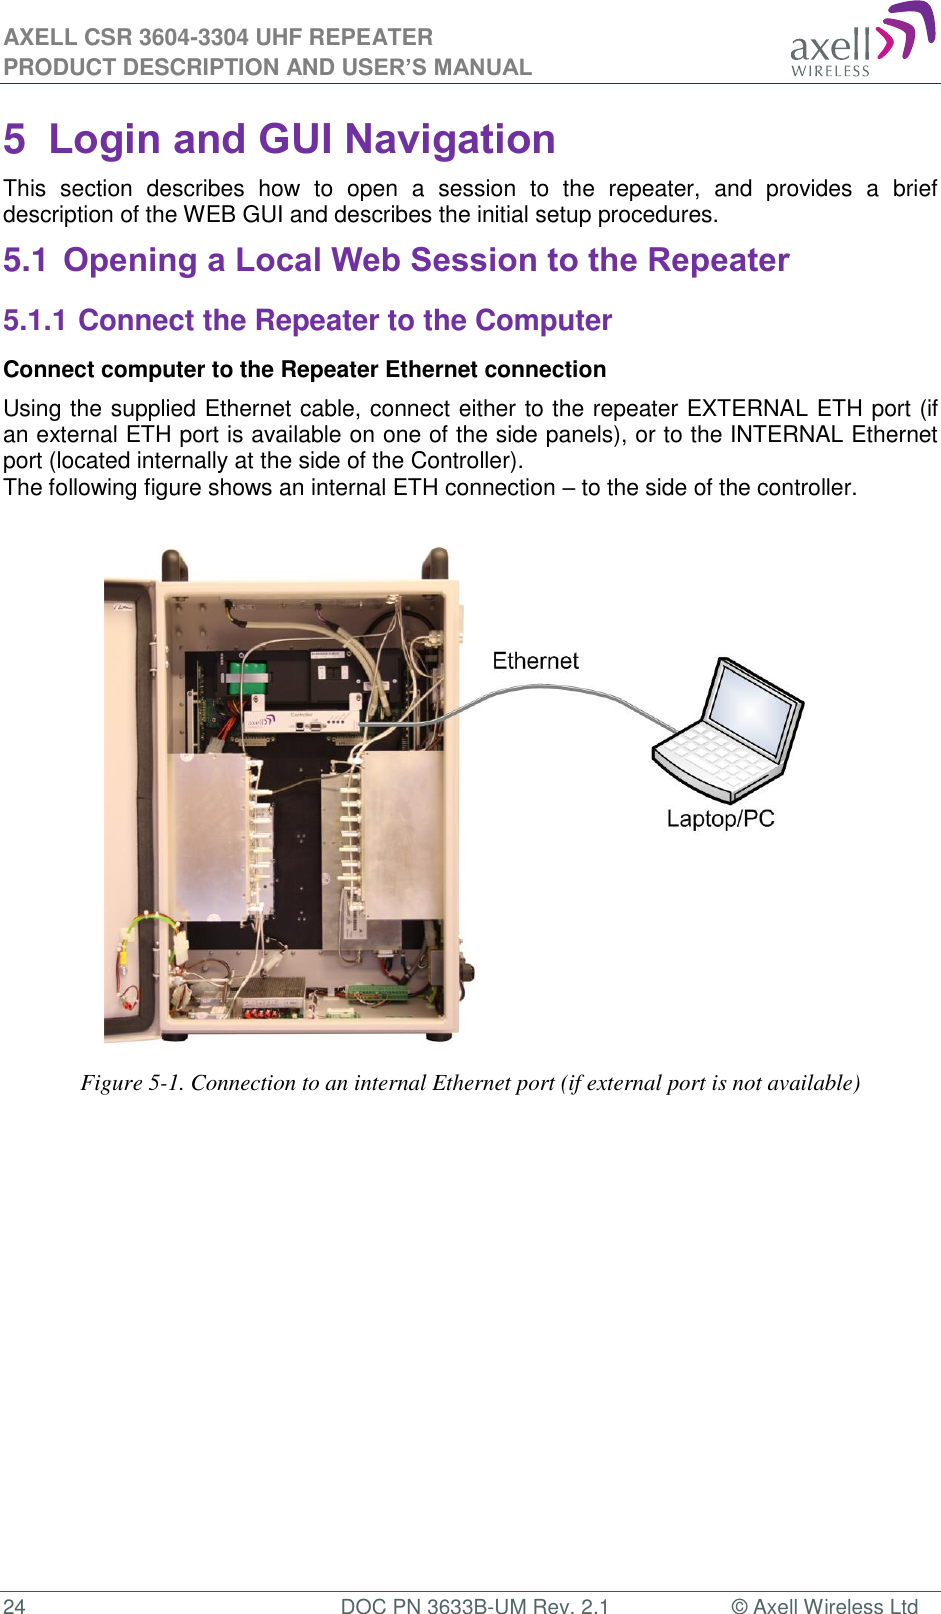 AXELL CSR 3604-3304 UHF REPEATER PRODUCT DESCRIPTION AND USER’S MANUAL  24  DOC PN 3633B-UM Rev. 2.1  © Axell Wireless Ltd  5  Login and GUI Navigation  This  section  describes  how  to  open  a  session  to  the  repeater,  and  provides  a  brief description of the WEB GUI and describes the initial setup procedures. 5.1 Opening a Local Web Session to the Repeater 5.1.1 Connect the Repeater to the Computer Connect computer to the Repeater Ethernet connection  Using the supplied Ethernet cable, connect either to the repeater EXTERNAL ETH port (if an external ETH port is available on one of the side panels), or to the INTERNAL Ethernet port (located internally at the side of the Controller). The following figure shows an internal ETH connection – to the side of the controller.                                    Figure 5-1. Connection to an internal Ethernet port (if external port is not available)           